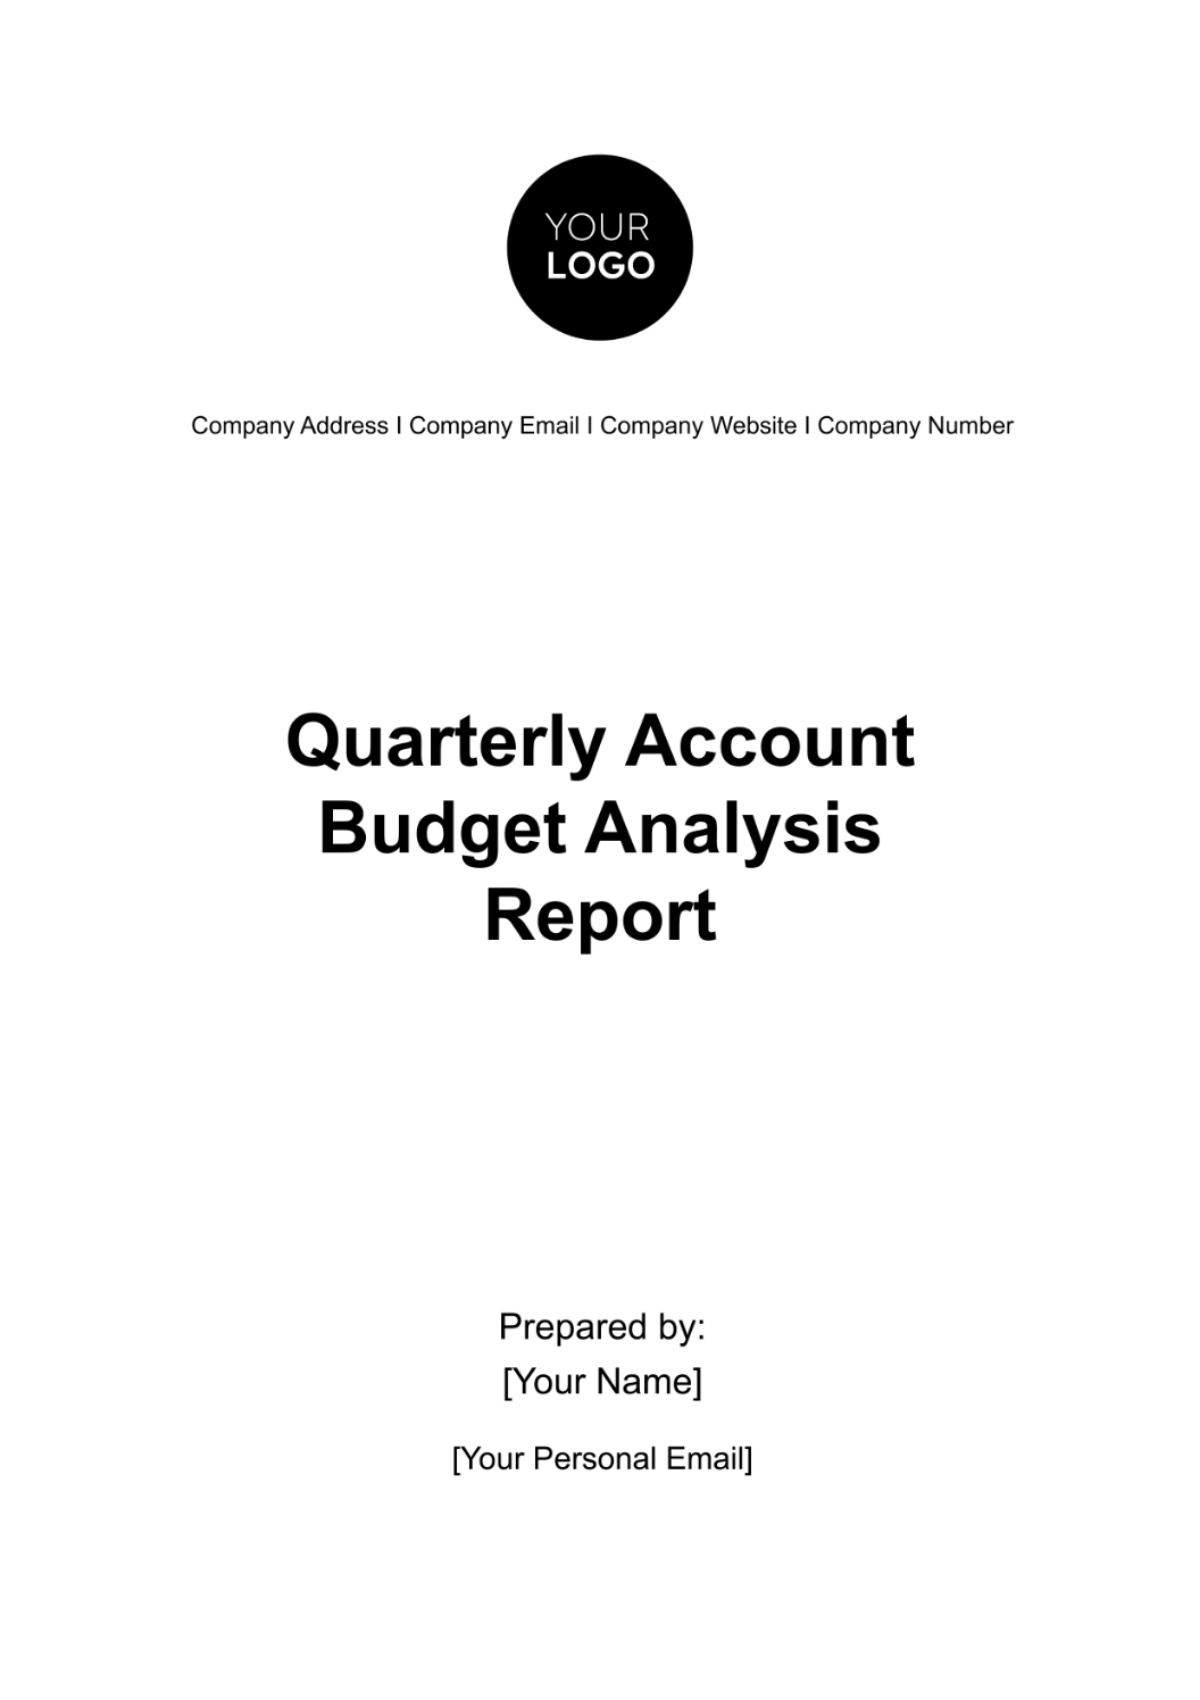 Quarterly Account Budget Analysis Report Template